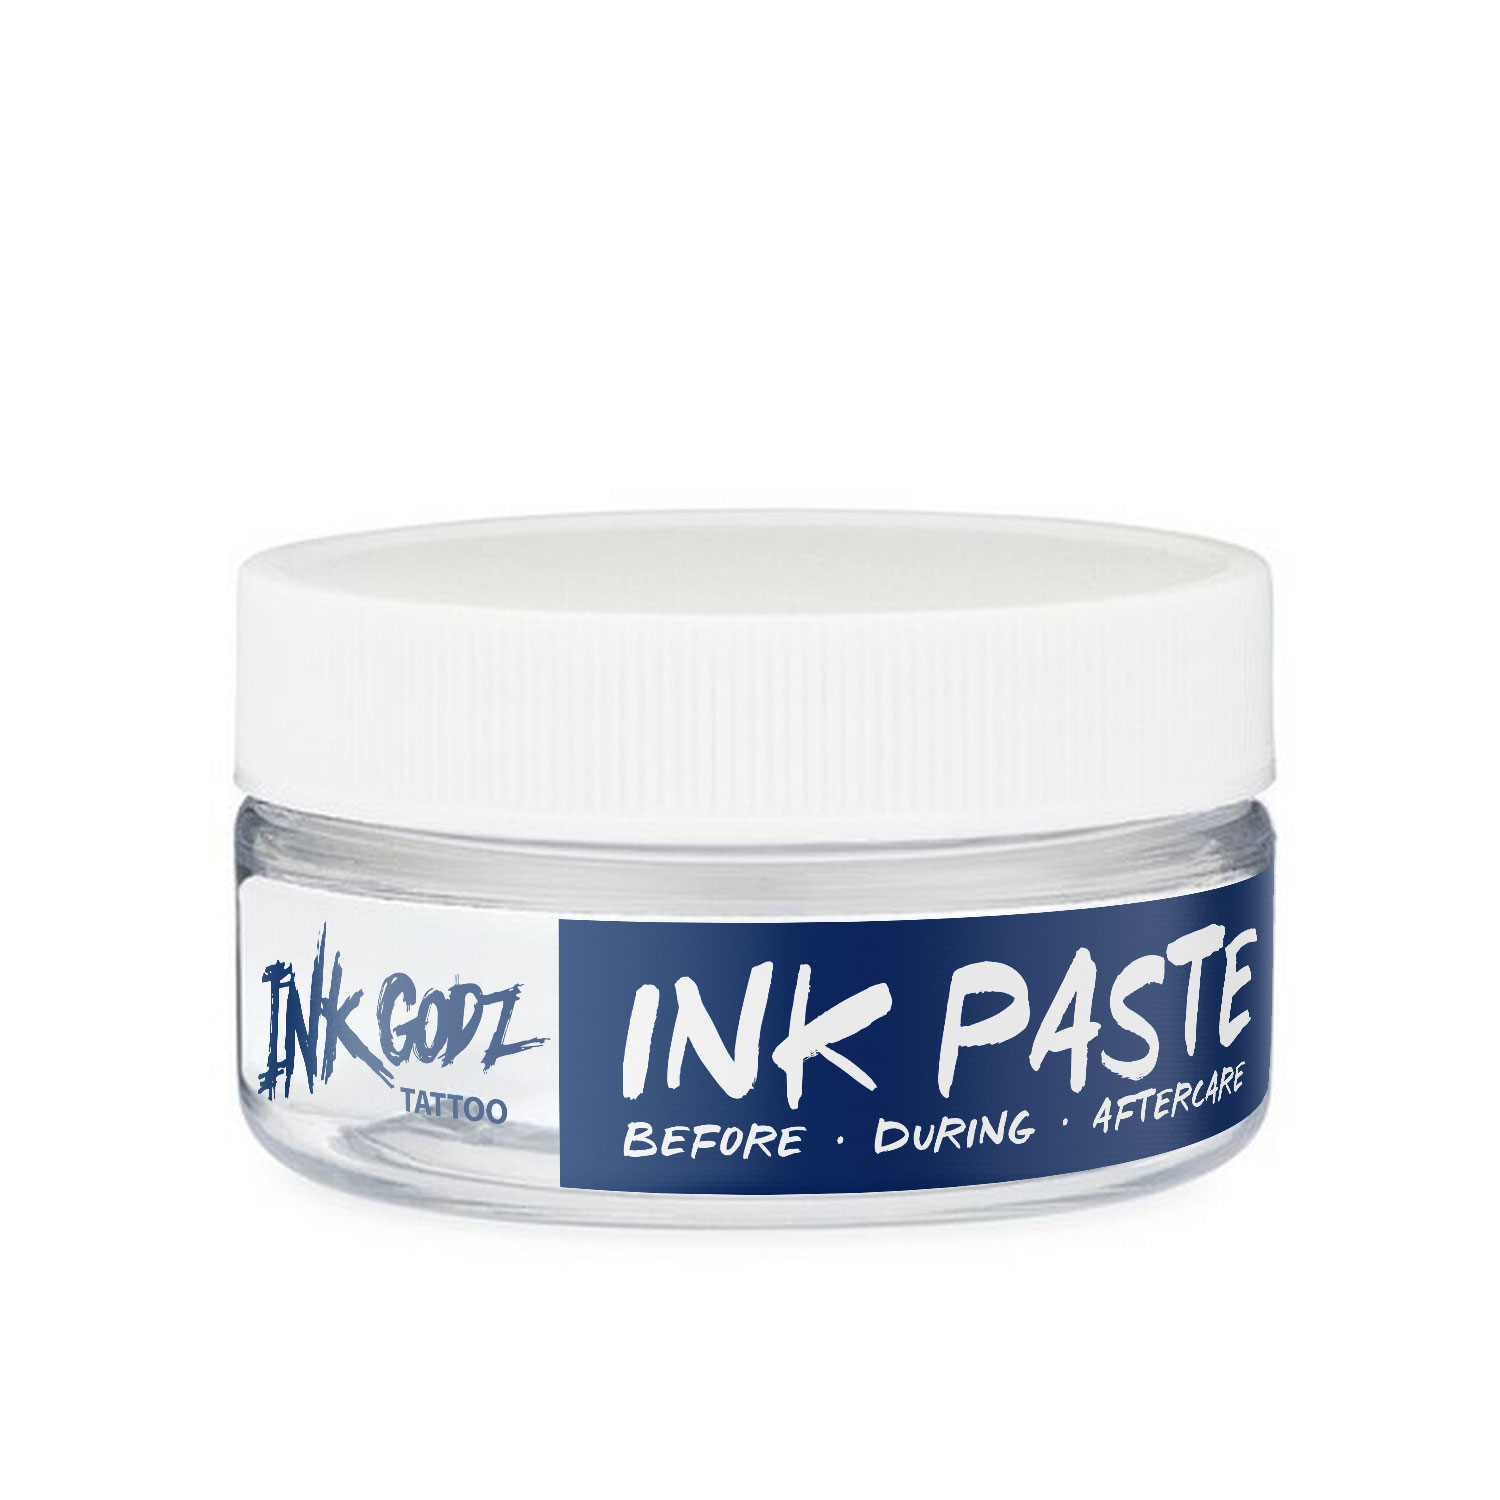 Ink Paste Tattoo Aftercare pic